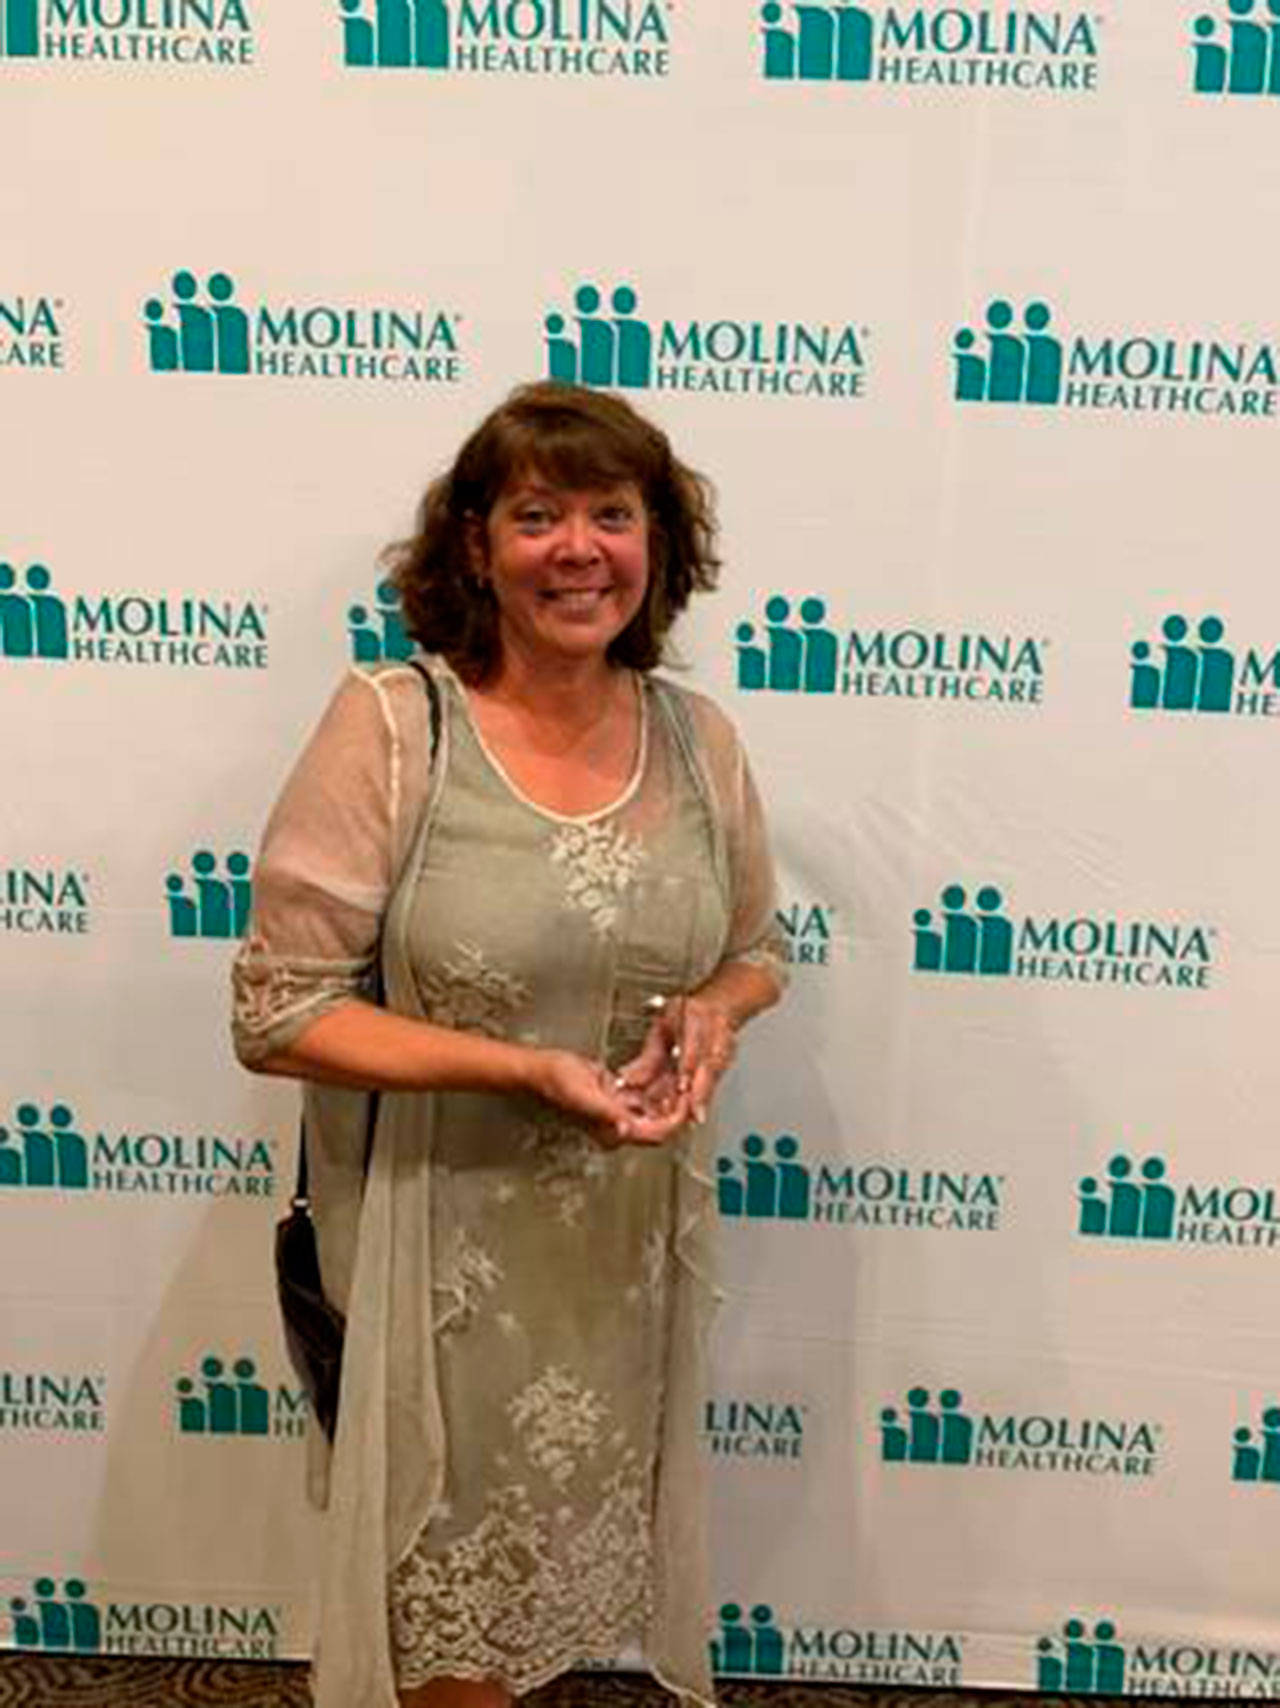 Photo courtesy of Patricia Hennessy | Lee Moniz, President of The Tyler Moniz Project, was recently recognized as a 2019 Molina Healthcare Community Champion.